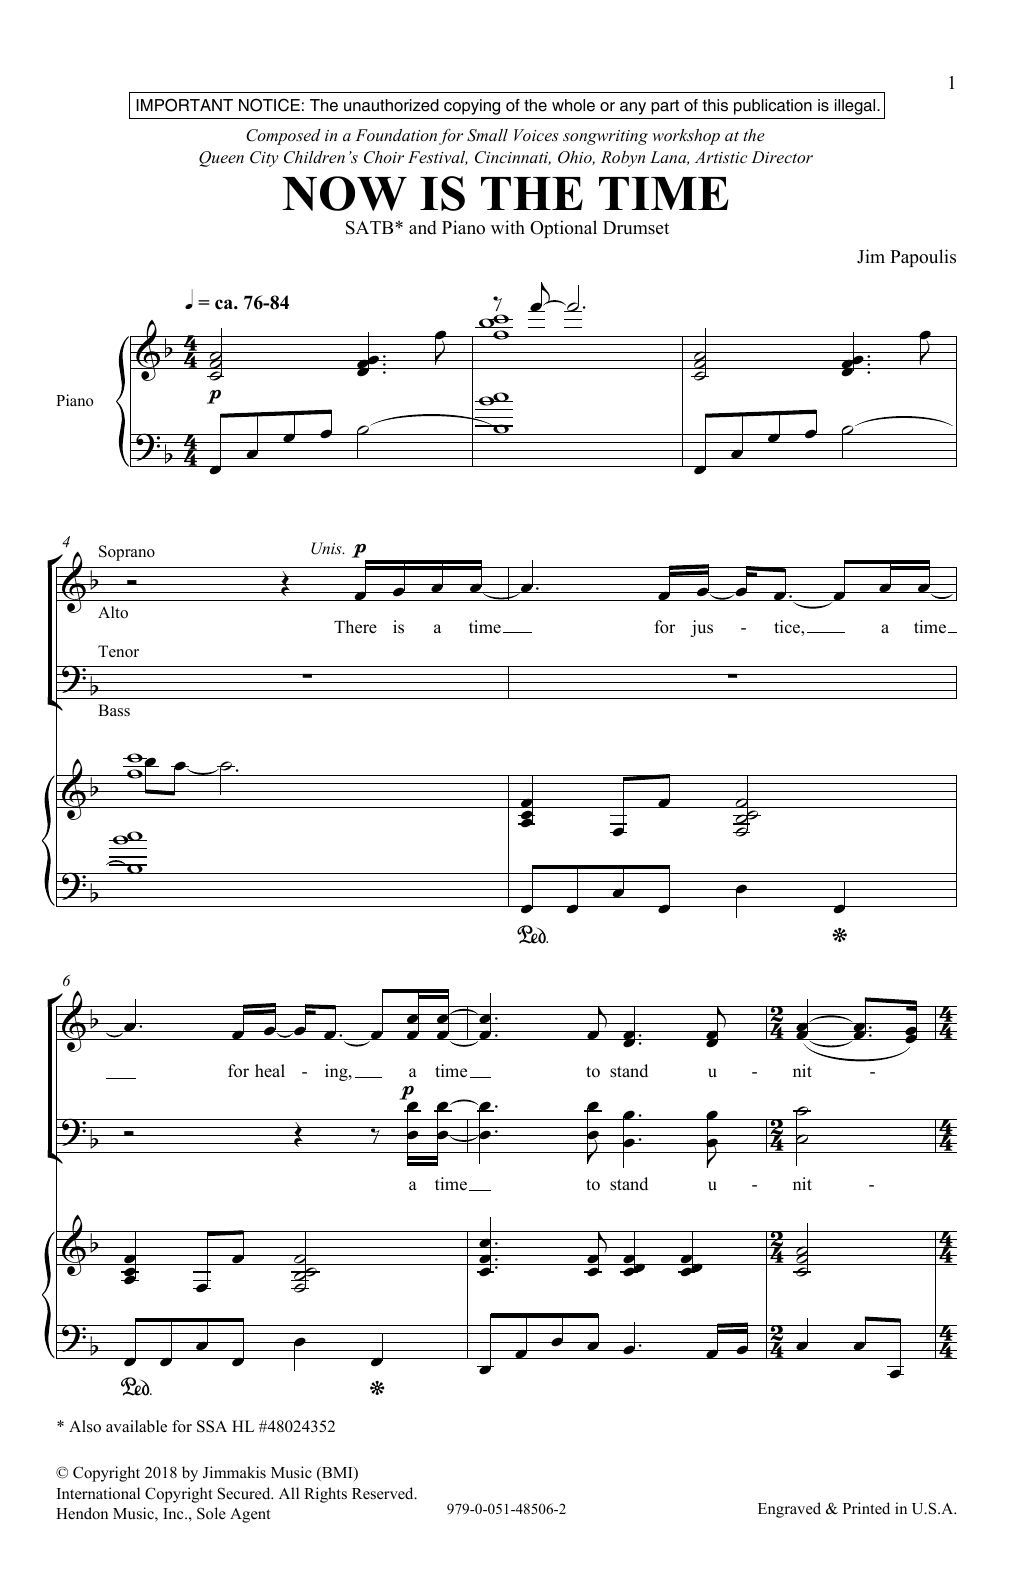 Download Jim Papoulis Now Is The Time Sheet Music